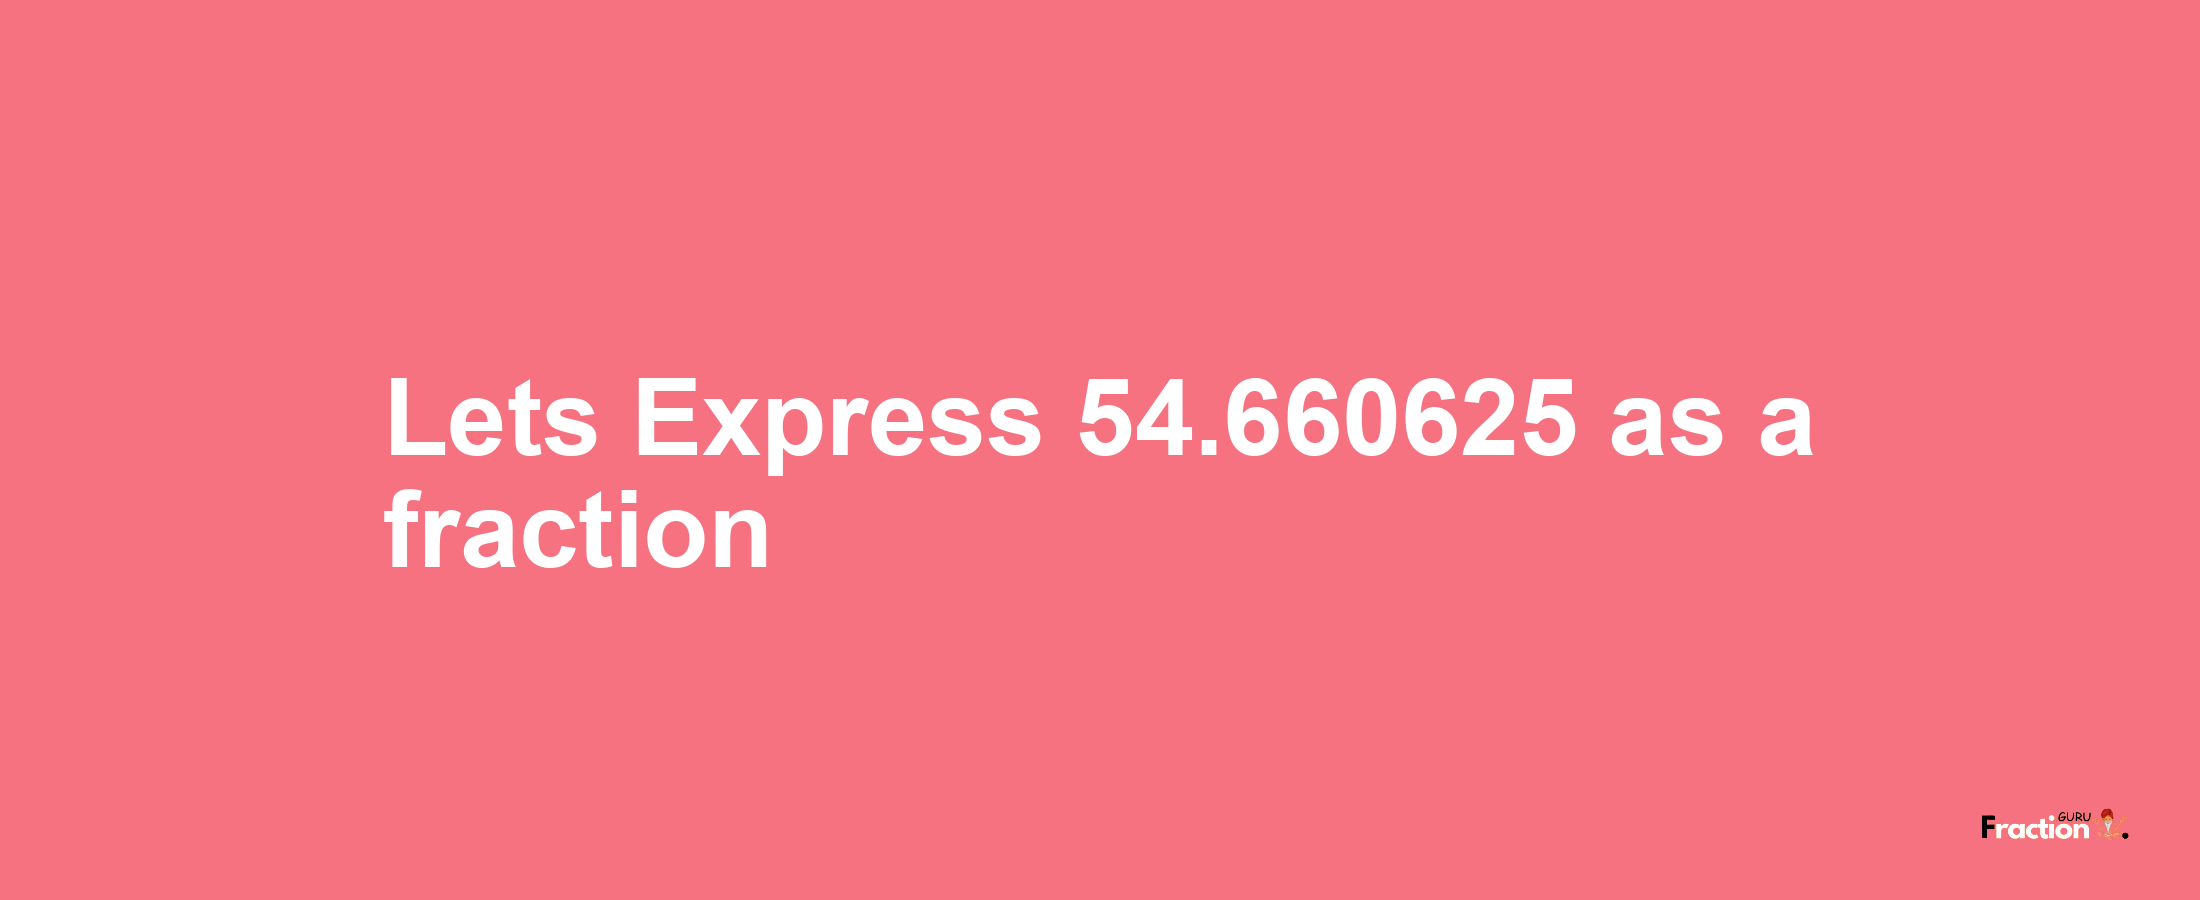 Lets Express 54.660625 as afraction